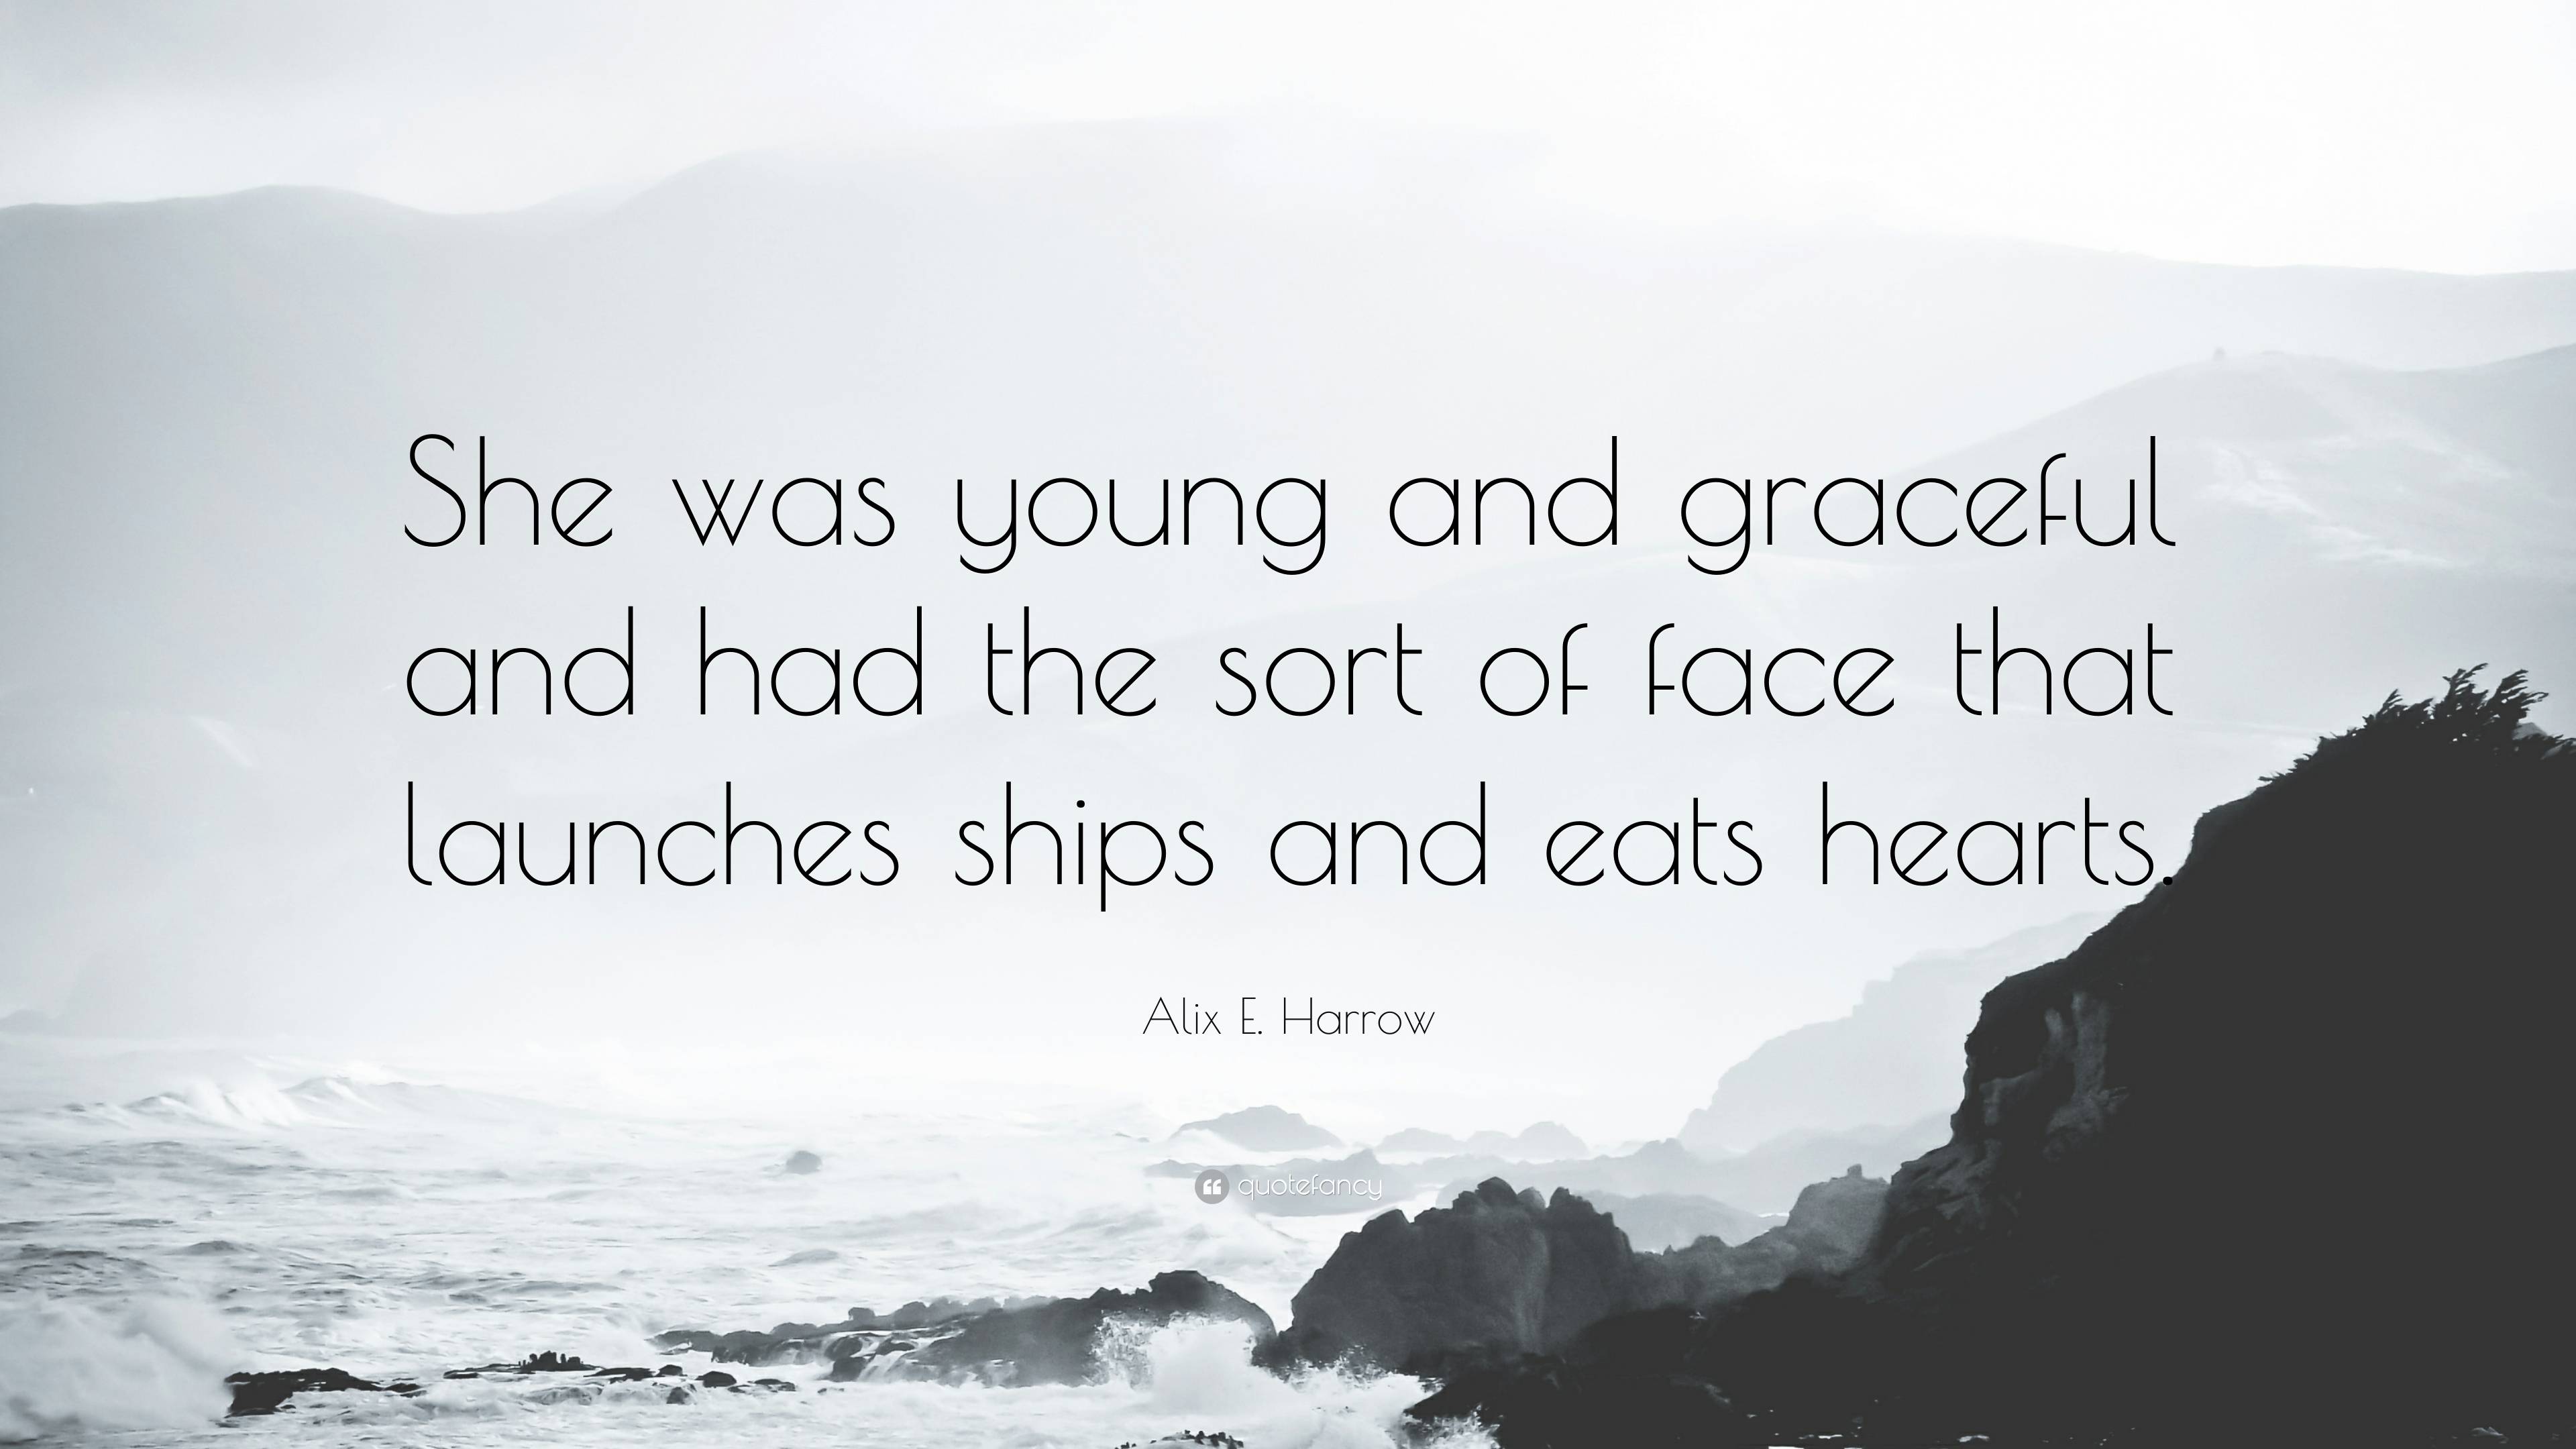 Alix E. Harrow Quote: “She was young and graceful and had the sort of ...